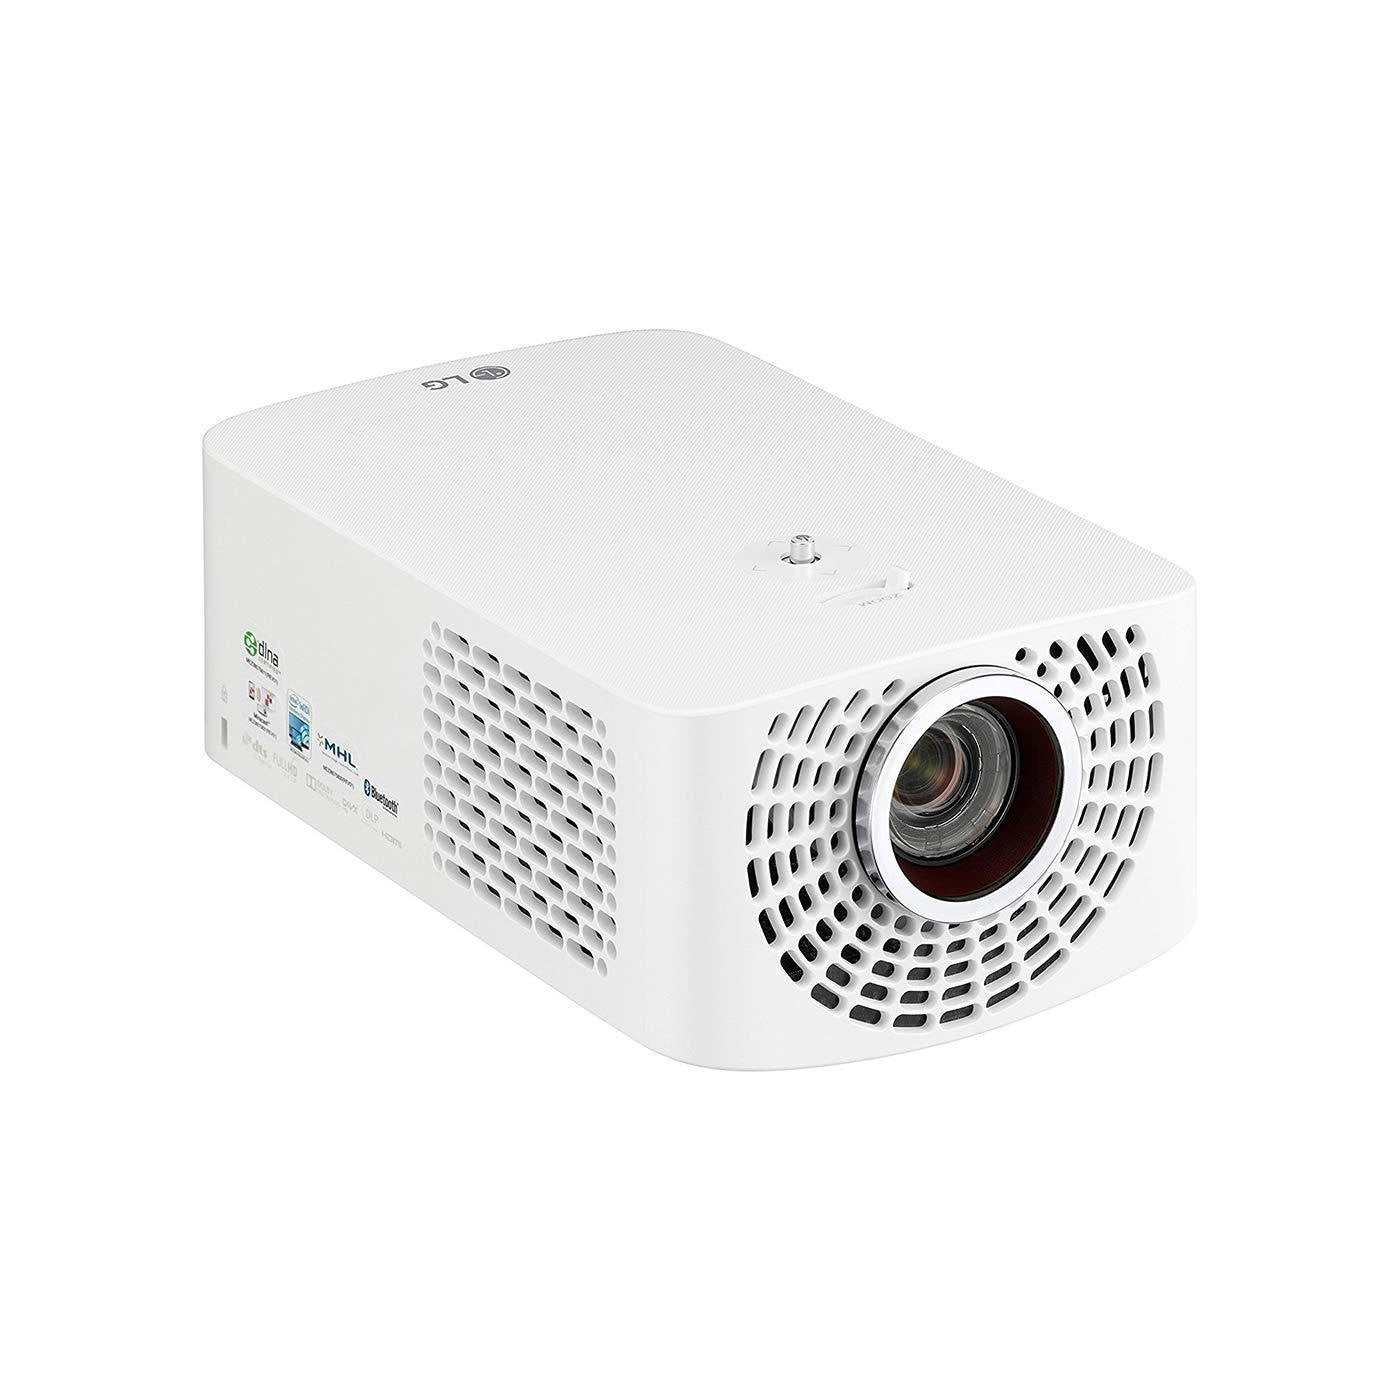 LG PF1500W LED Home Theater Projector with Smart TV and Magic Remote